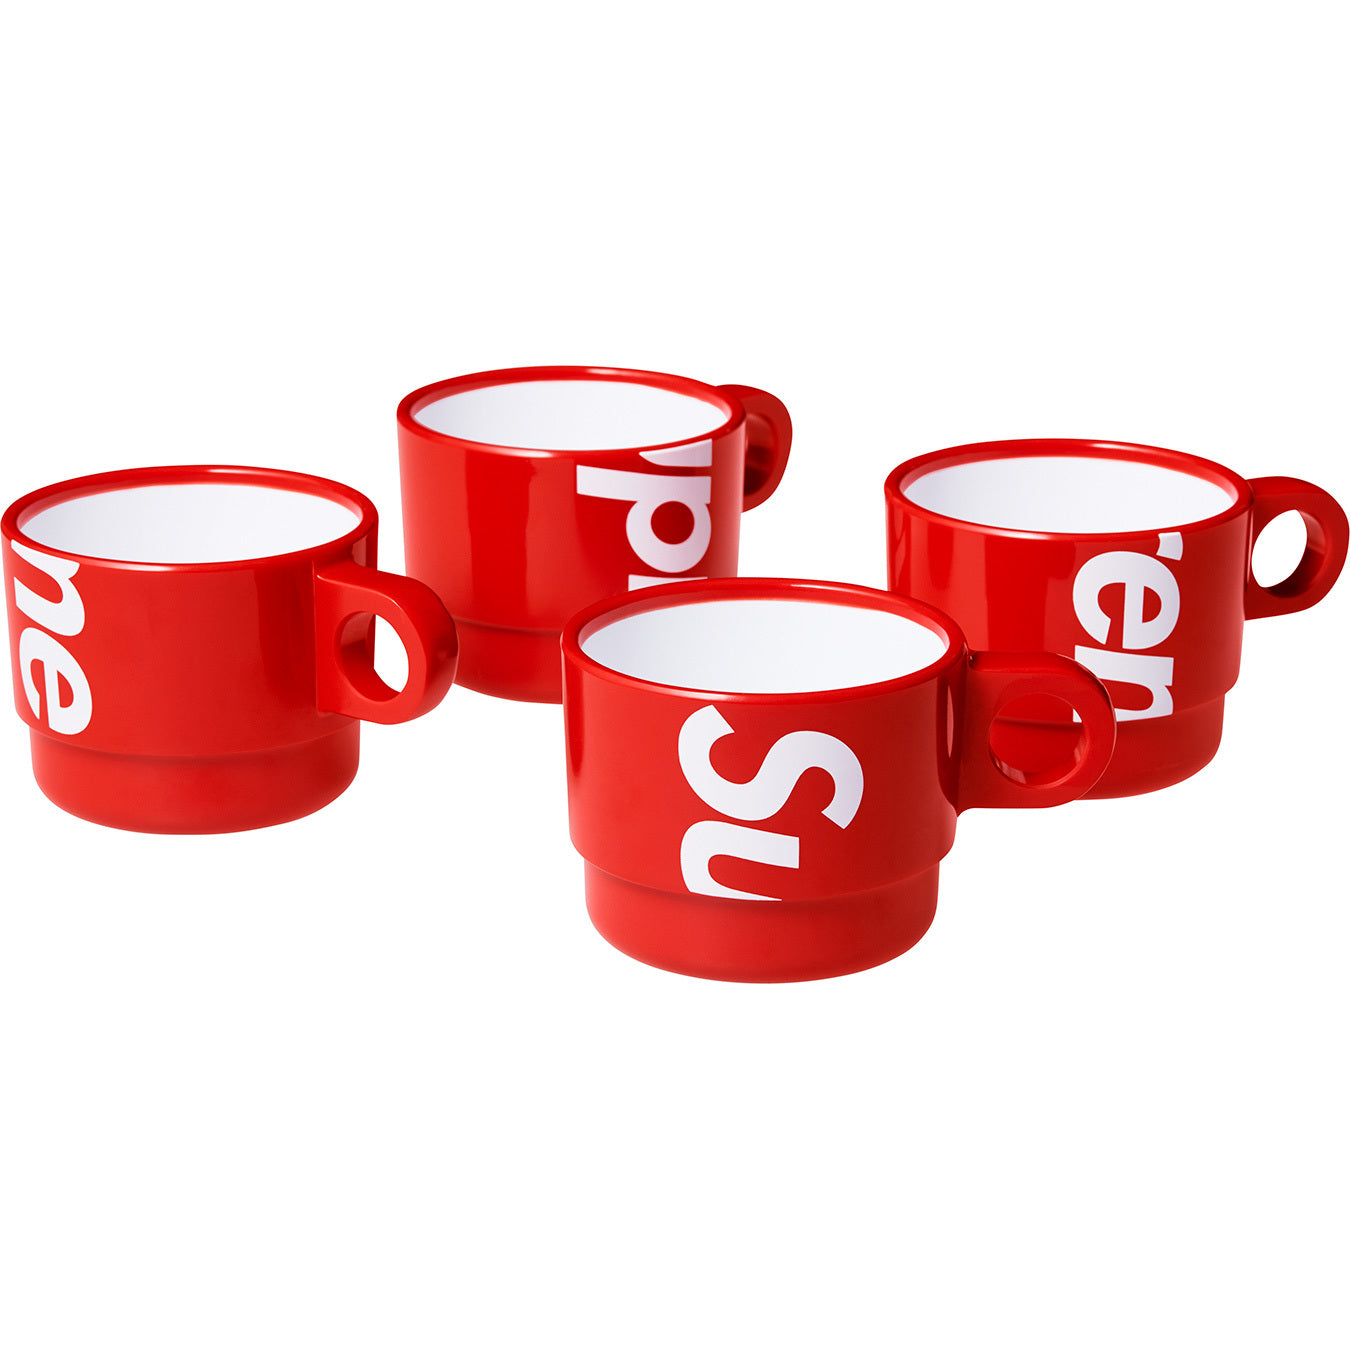 Supreme Stacking Cups (Set of 4) from Supreme